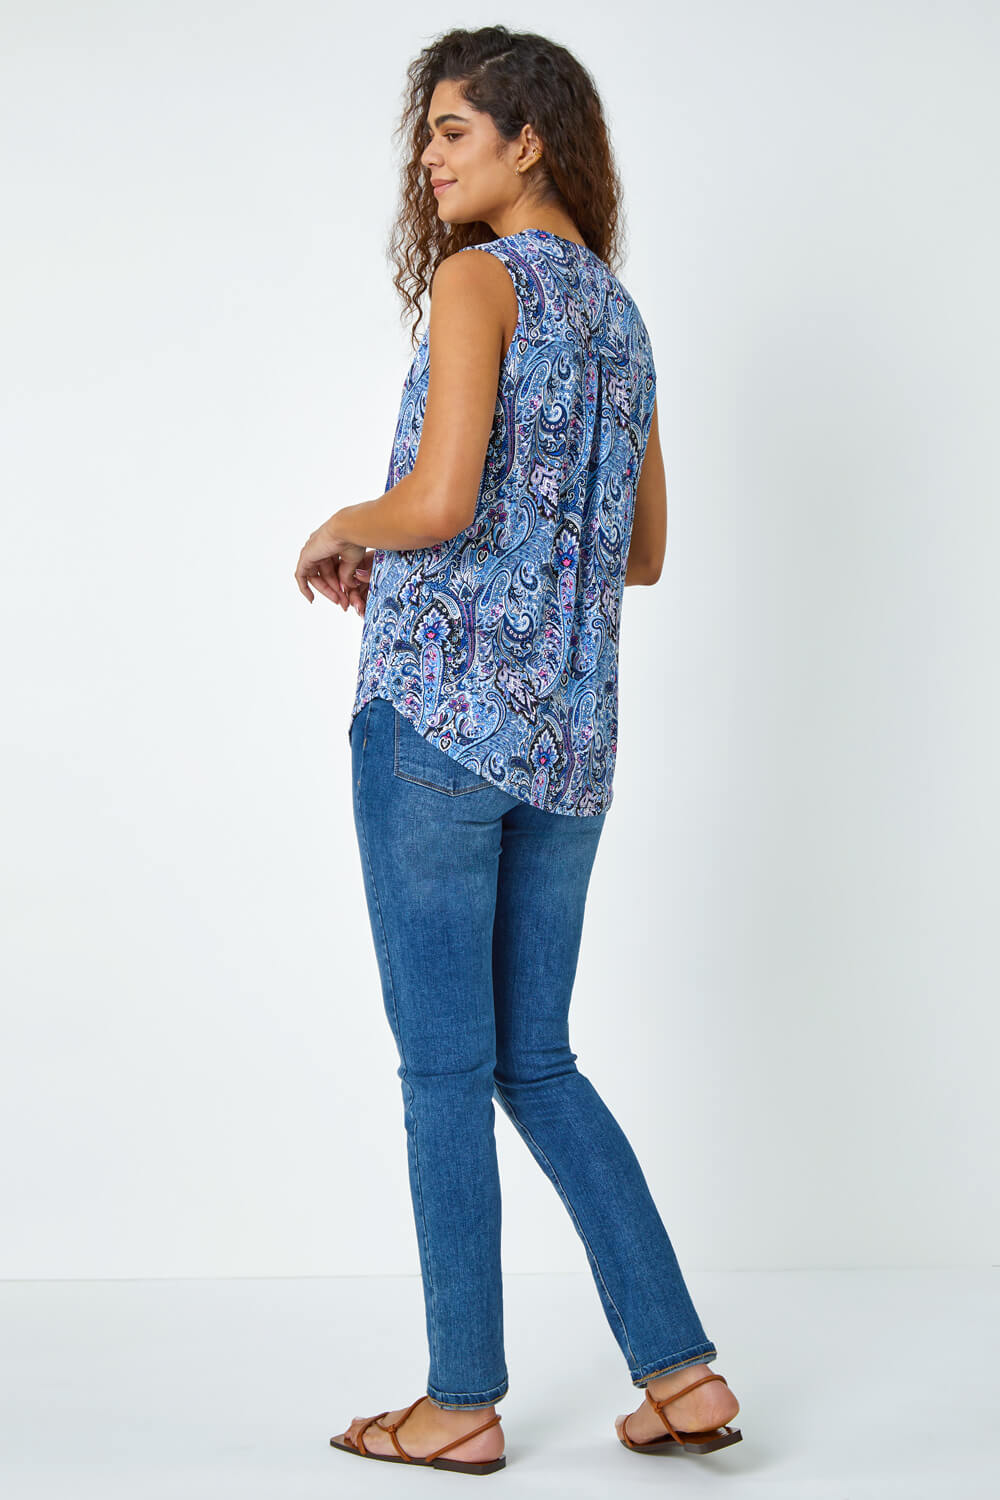 Blue Paisley Print Sleeveless Stretch Top, Image 3 of 5